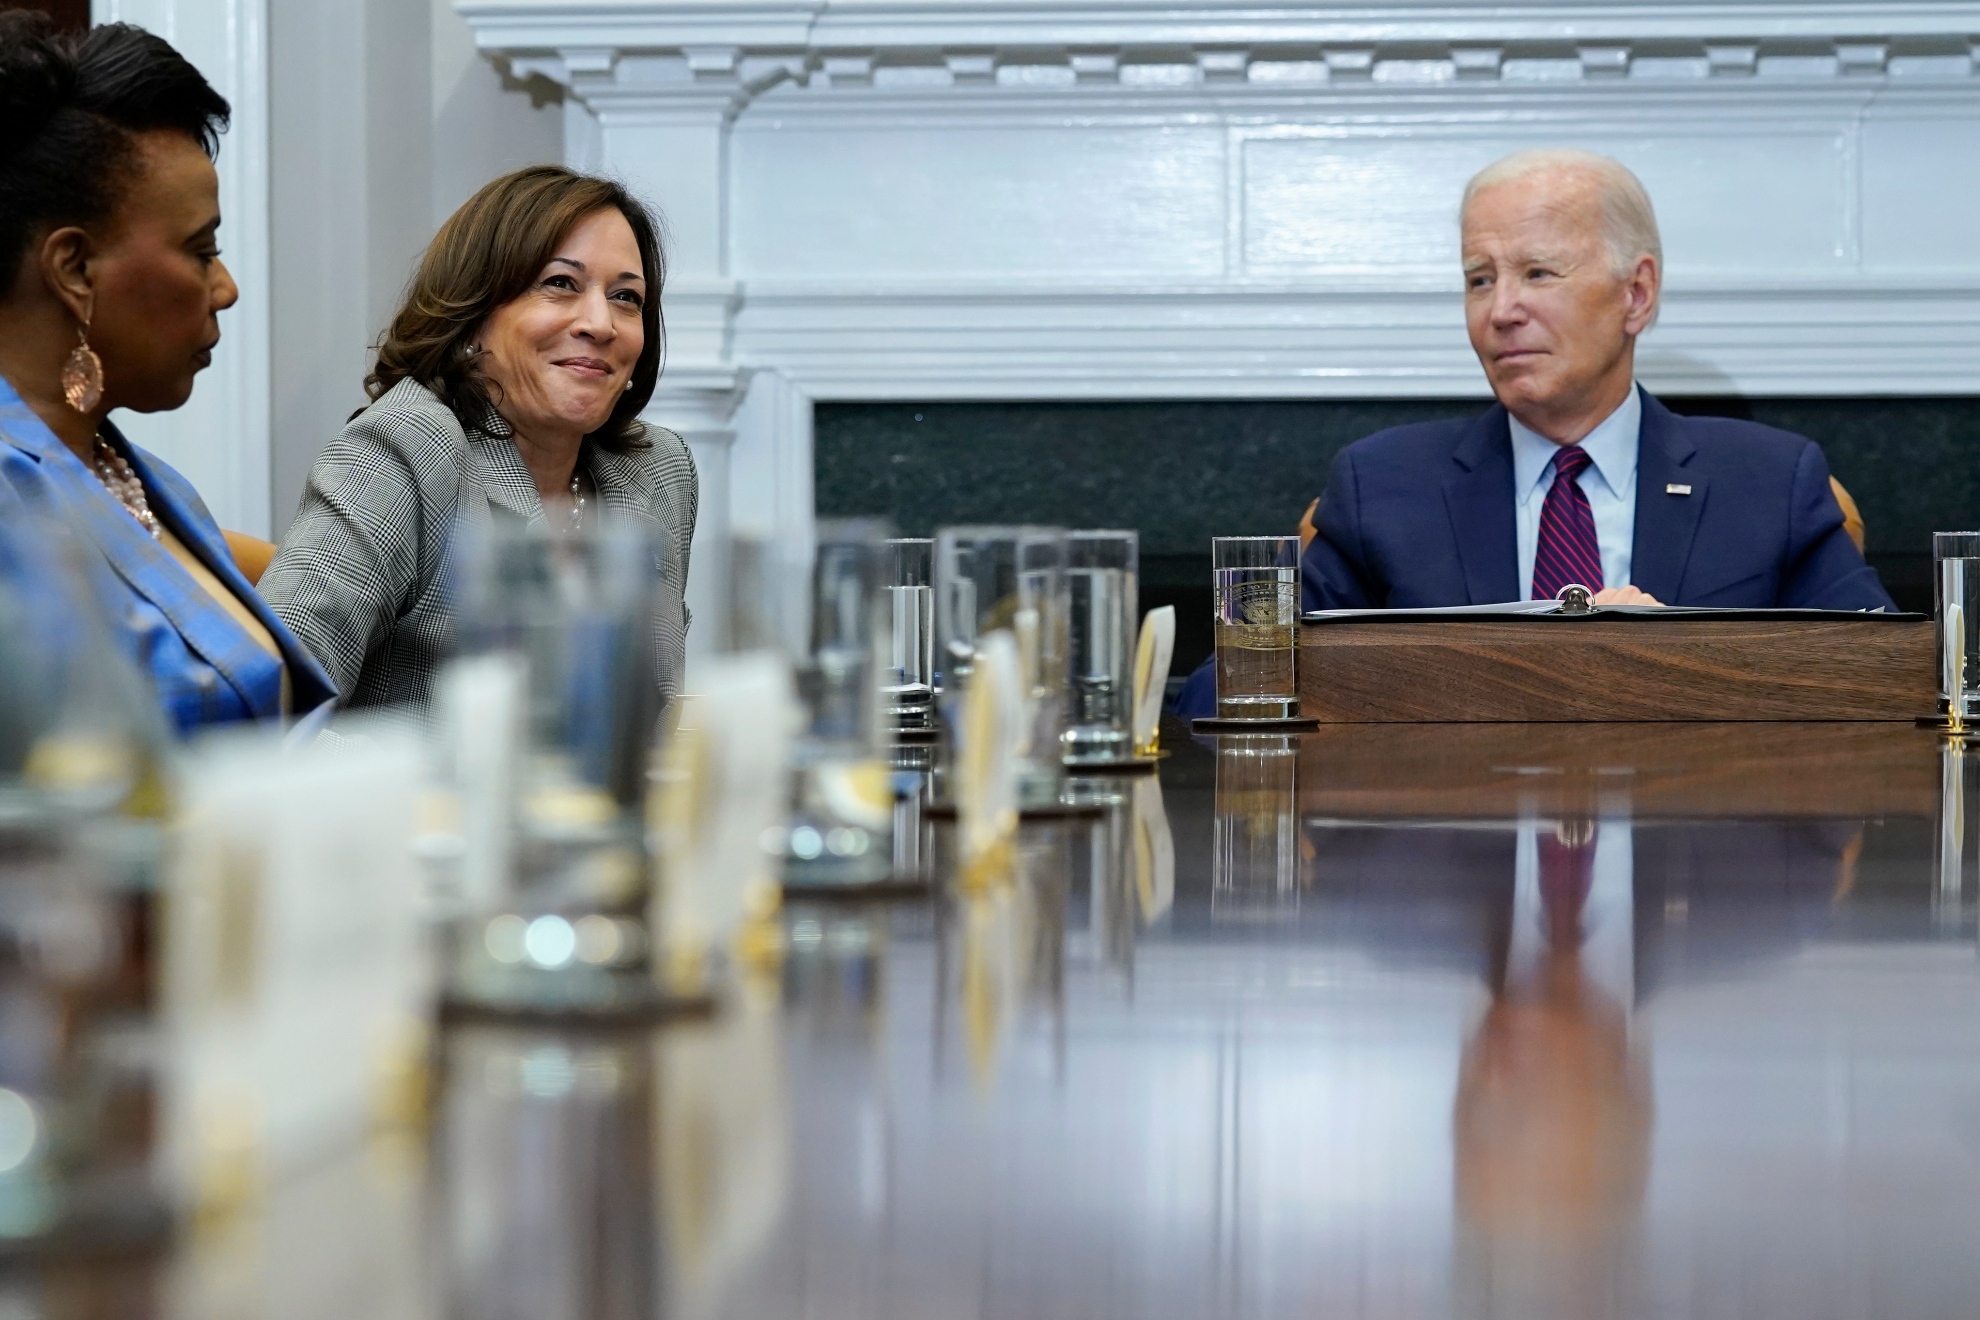 President Joe Biden during a meeting with his cabinet.